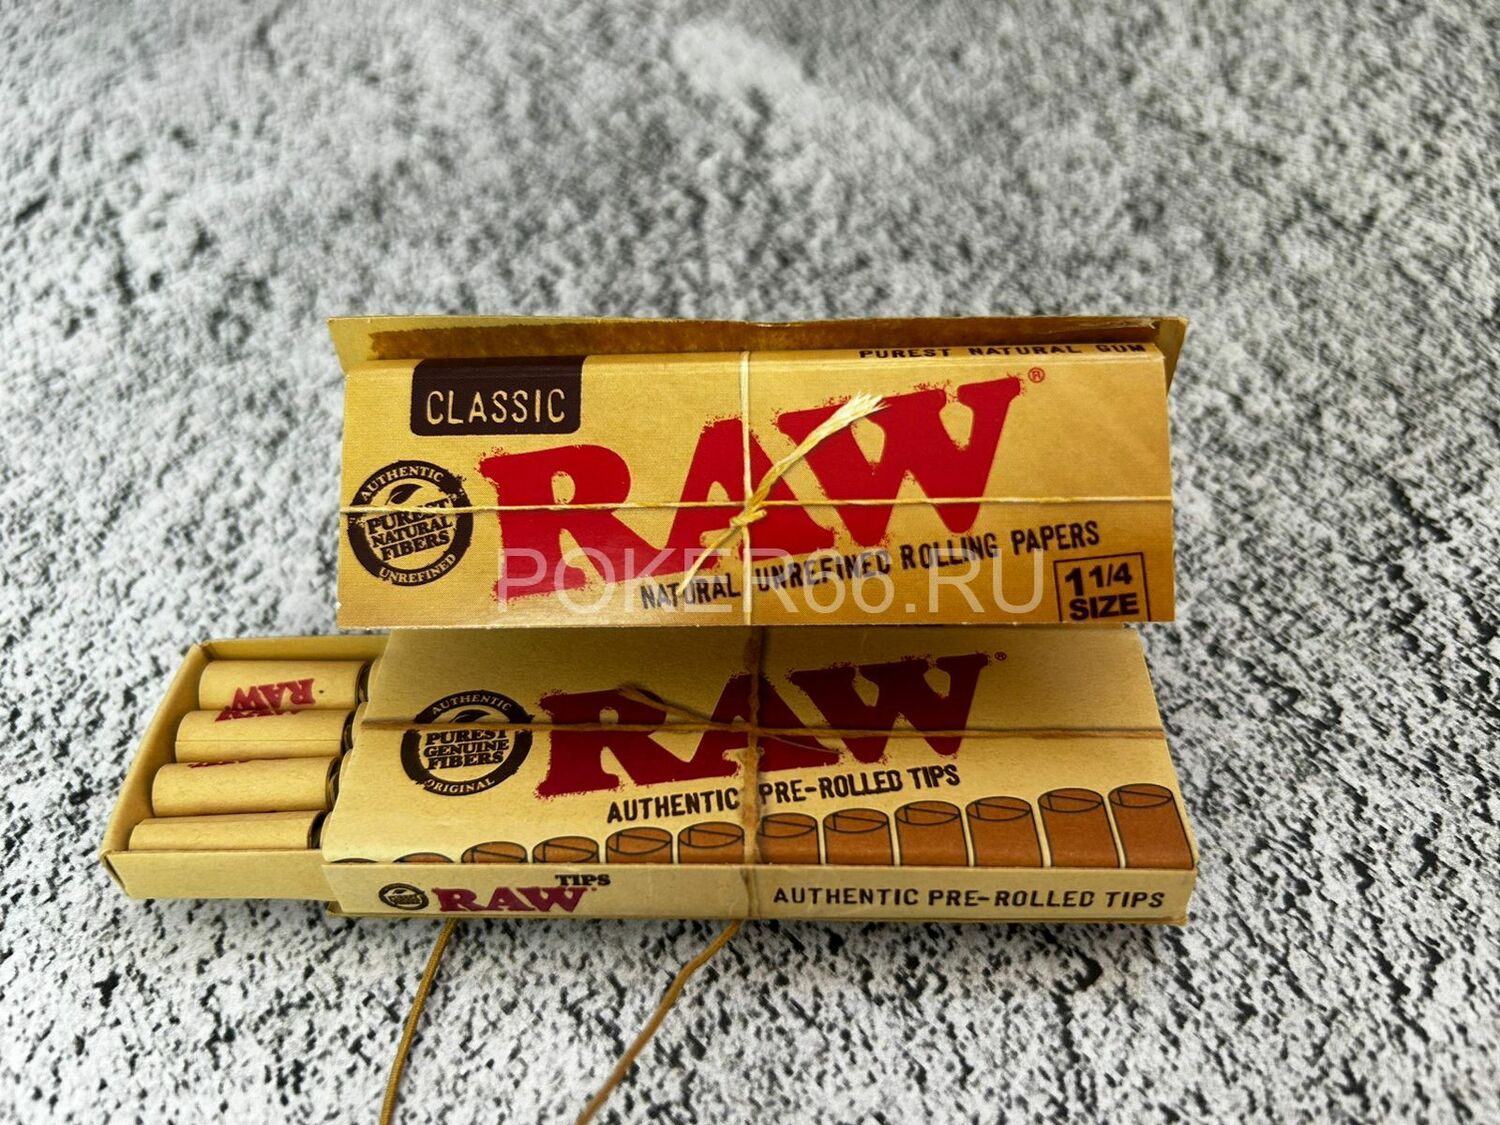 Бумажки с Pre-Rolled Tips RAW "Classic" Conno1¼RAW 1 1/4 + Pre-Rolled Tips